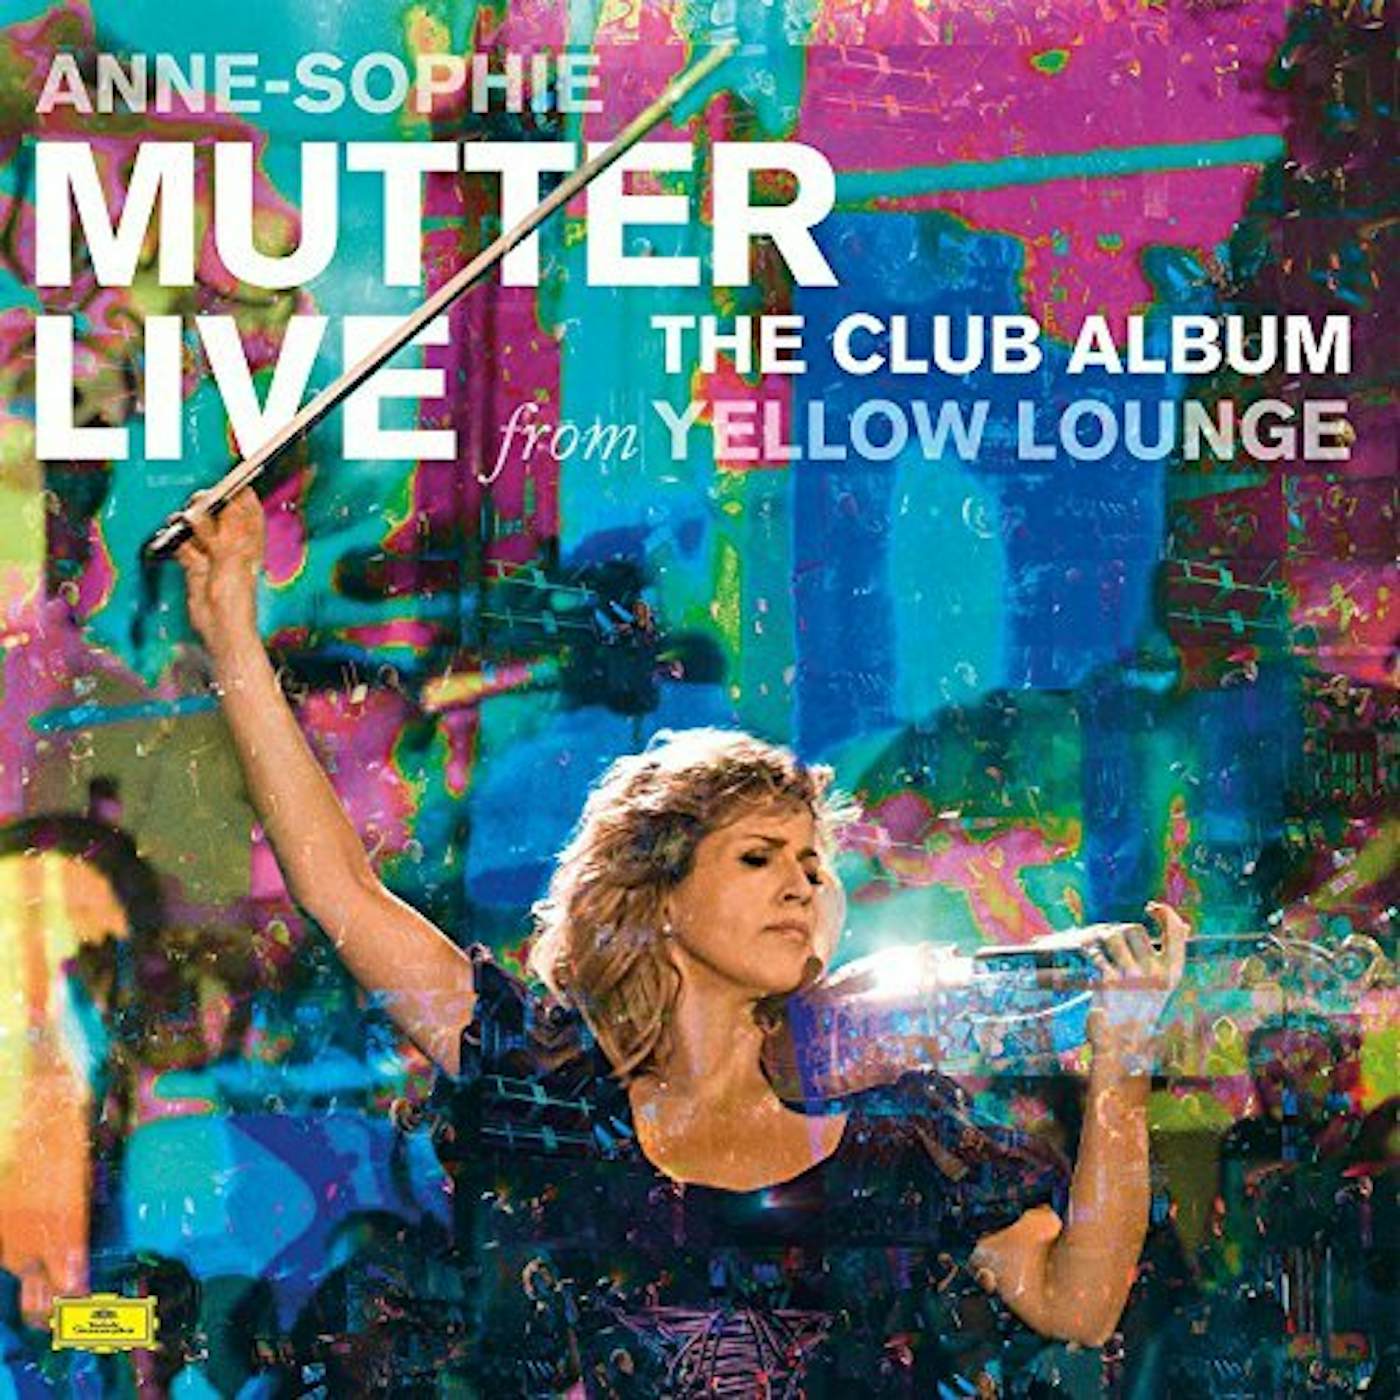 Anne-Sophie Mutter CLUB ALBUM: LIVE FROM YELLOW LOUNGE Vinyl Record